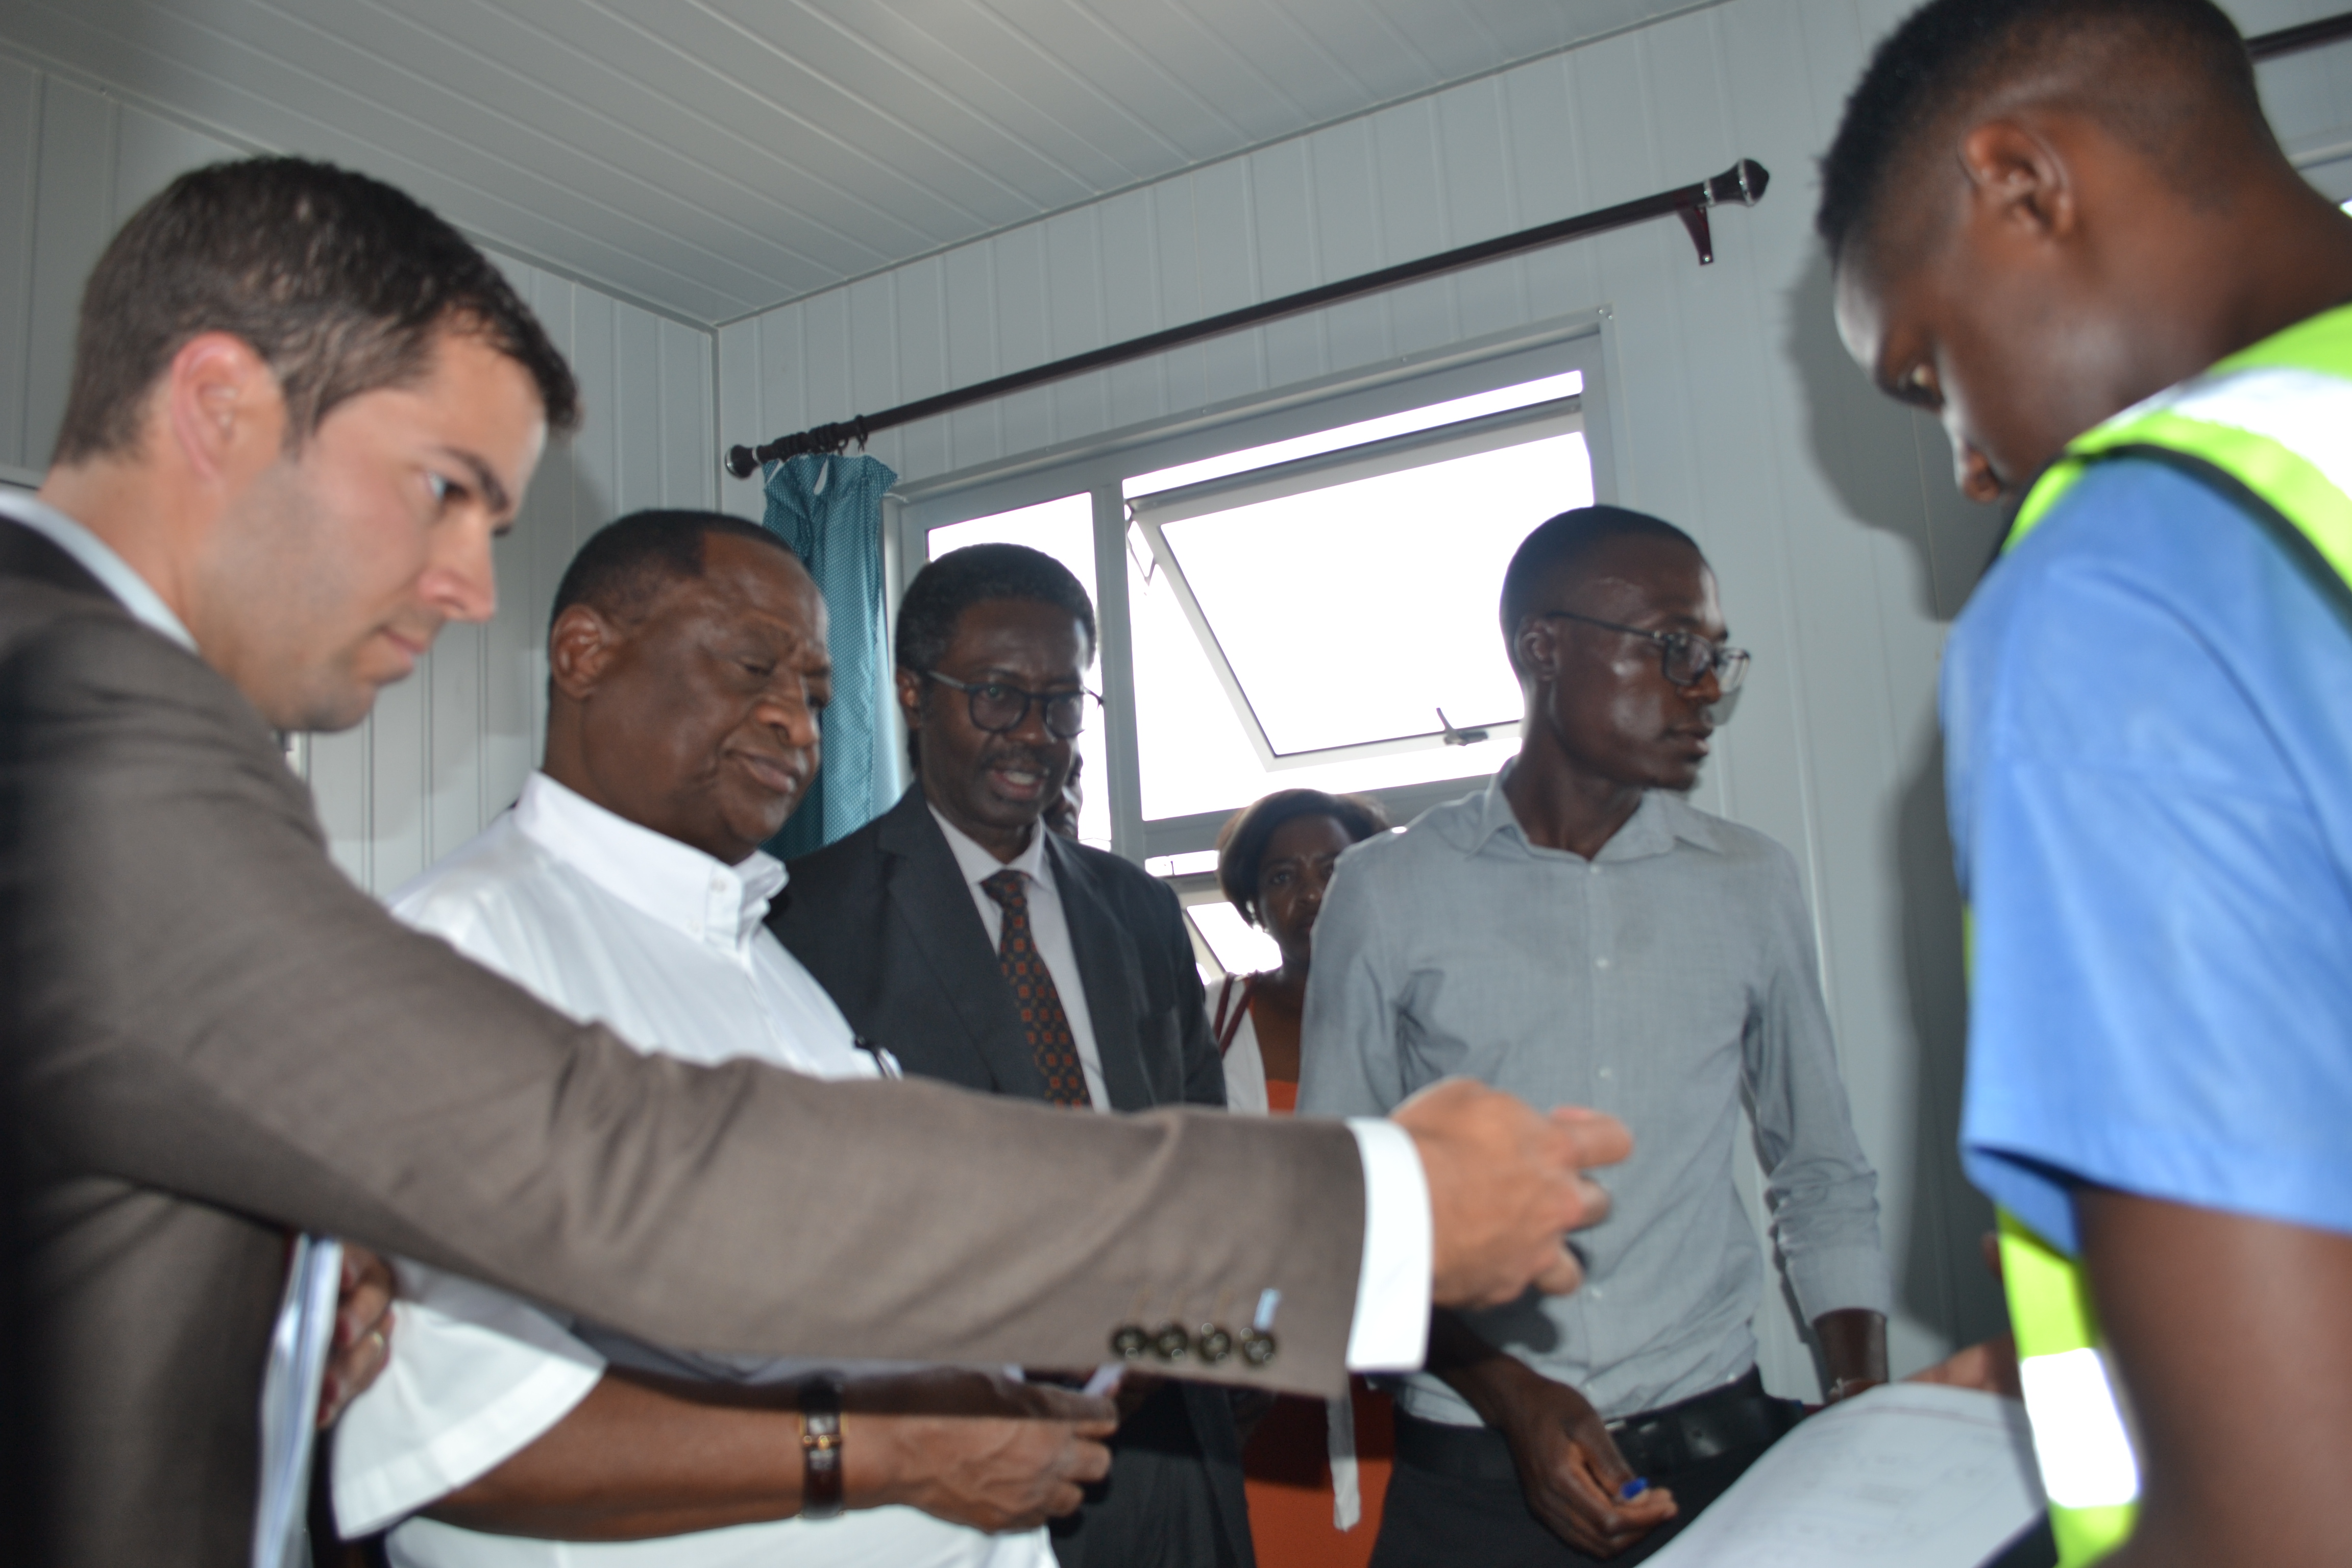 Minister of Health and Social Services, Dr Kalumbi Shangula, CDC Director, Dr. Eric Dziuban and WHO Representative, Dr Charles Sagoe-Moses at the Hosea Kutato International Airport inspecting the readiness of the airport for initial screening and the temporary isolation facilities.